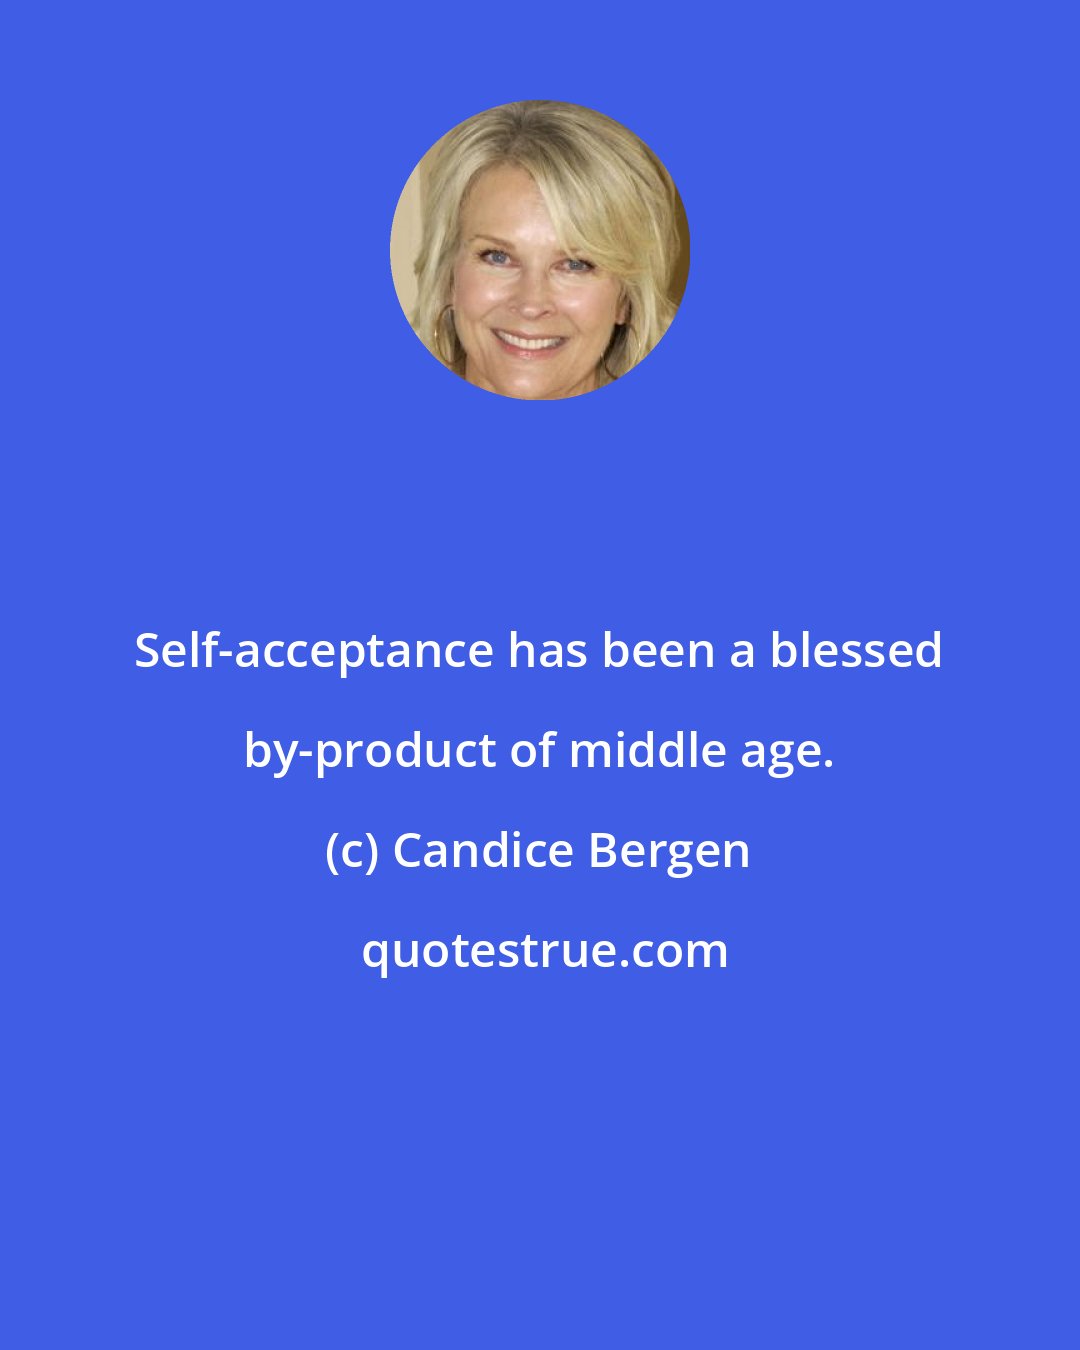 Candice Bergen: Self-acceptance has been a blessed by-product of middle age.